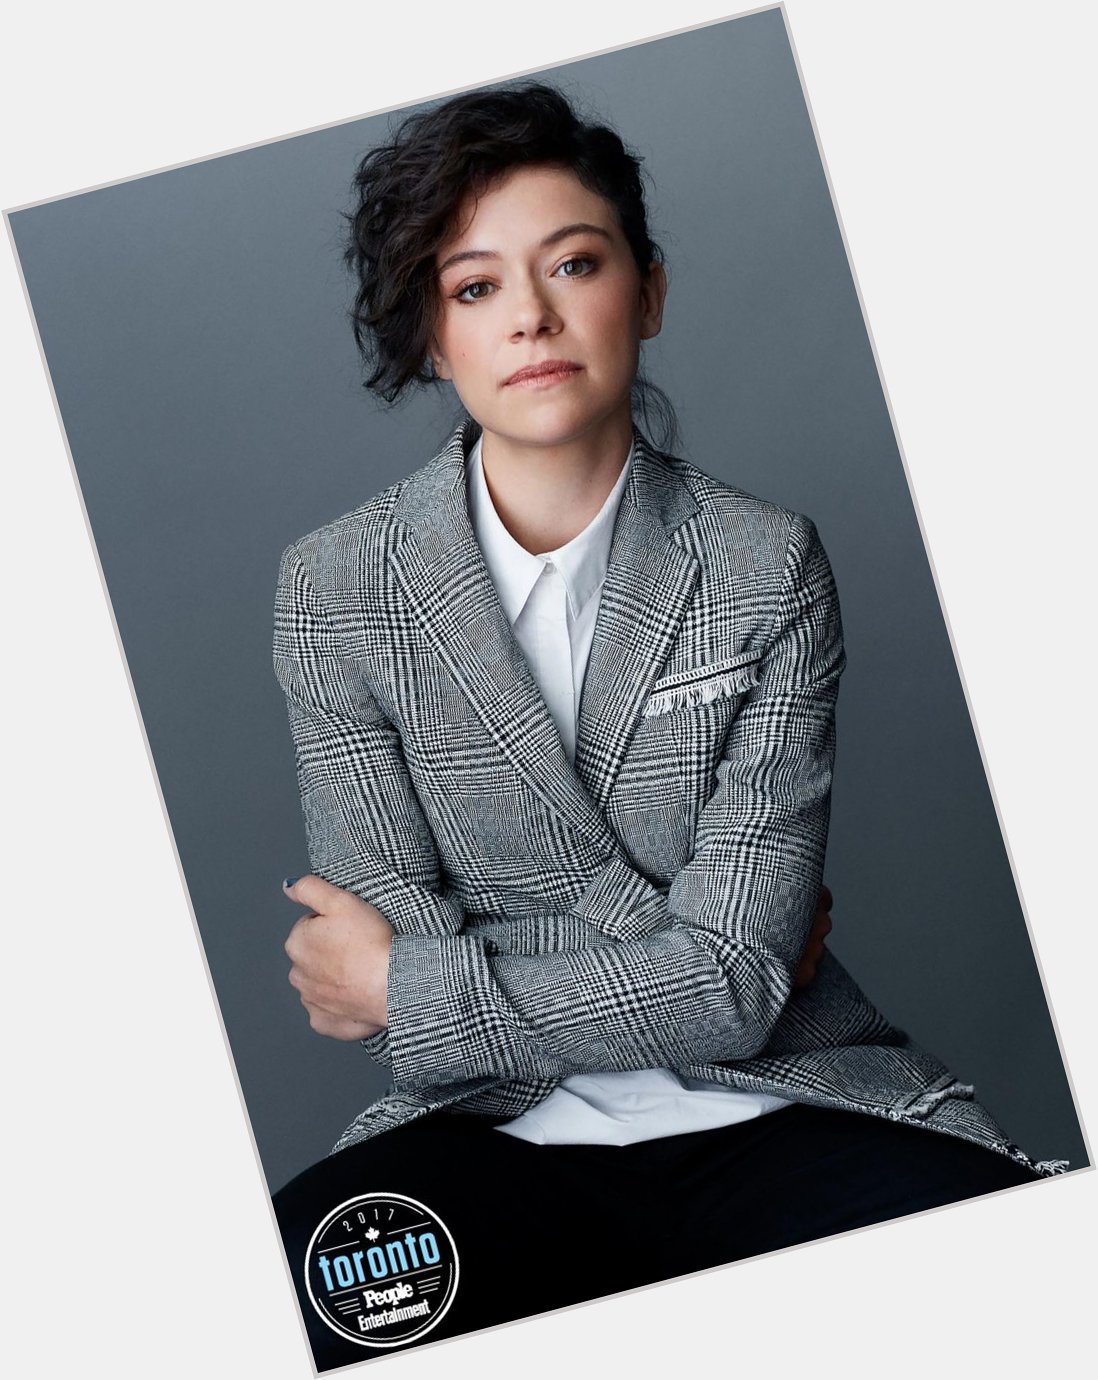 Happy birthday to the most talented, adorable, humblest cinnamon roll, Tatiana Maslany  